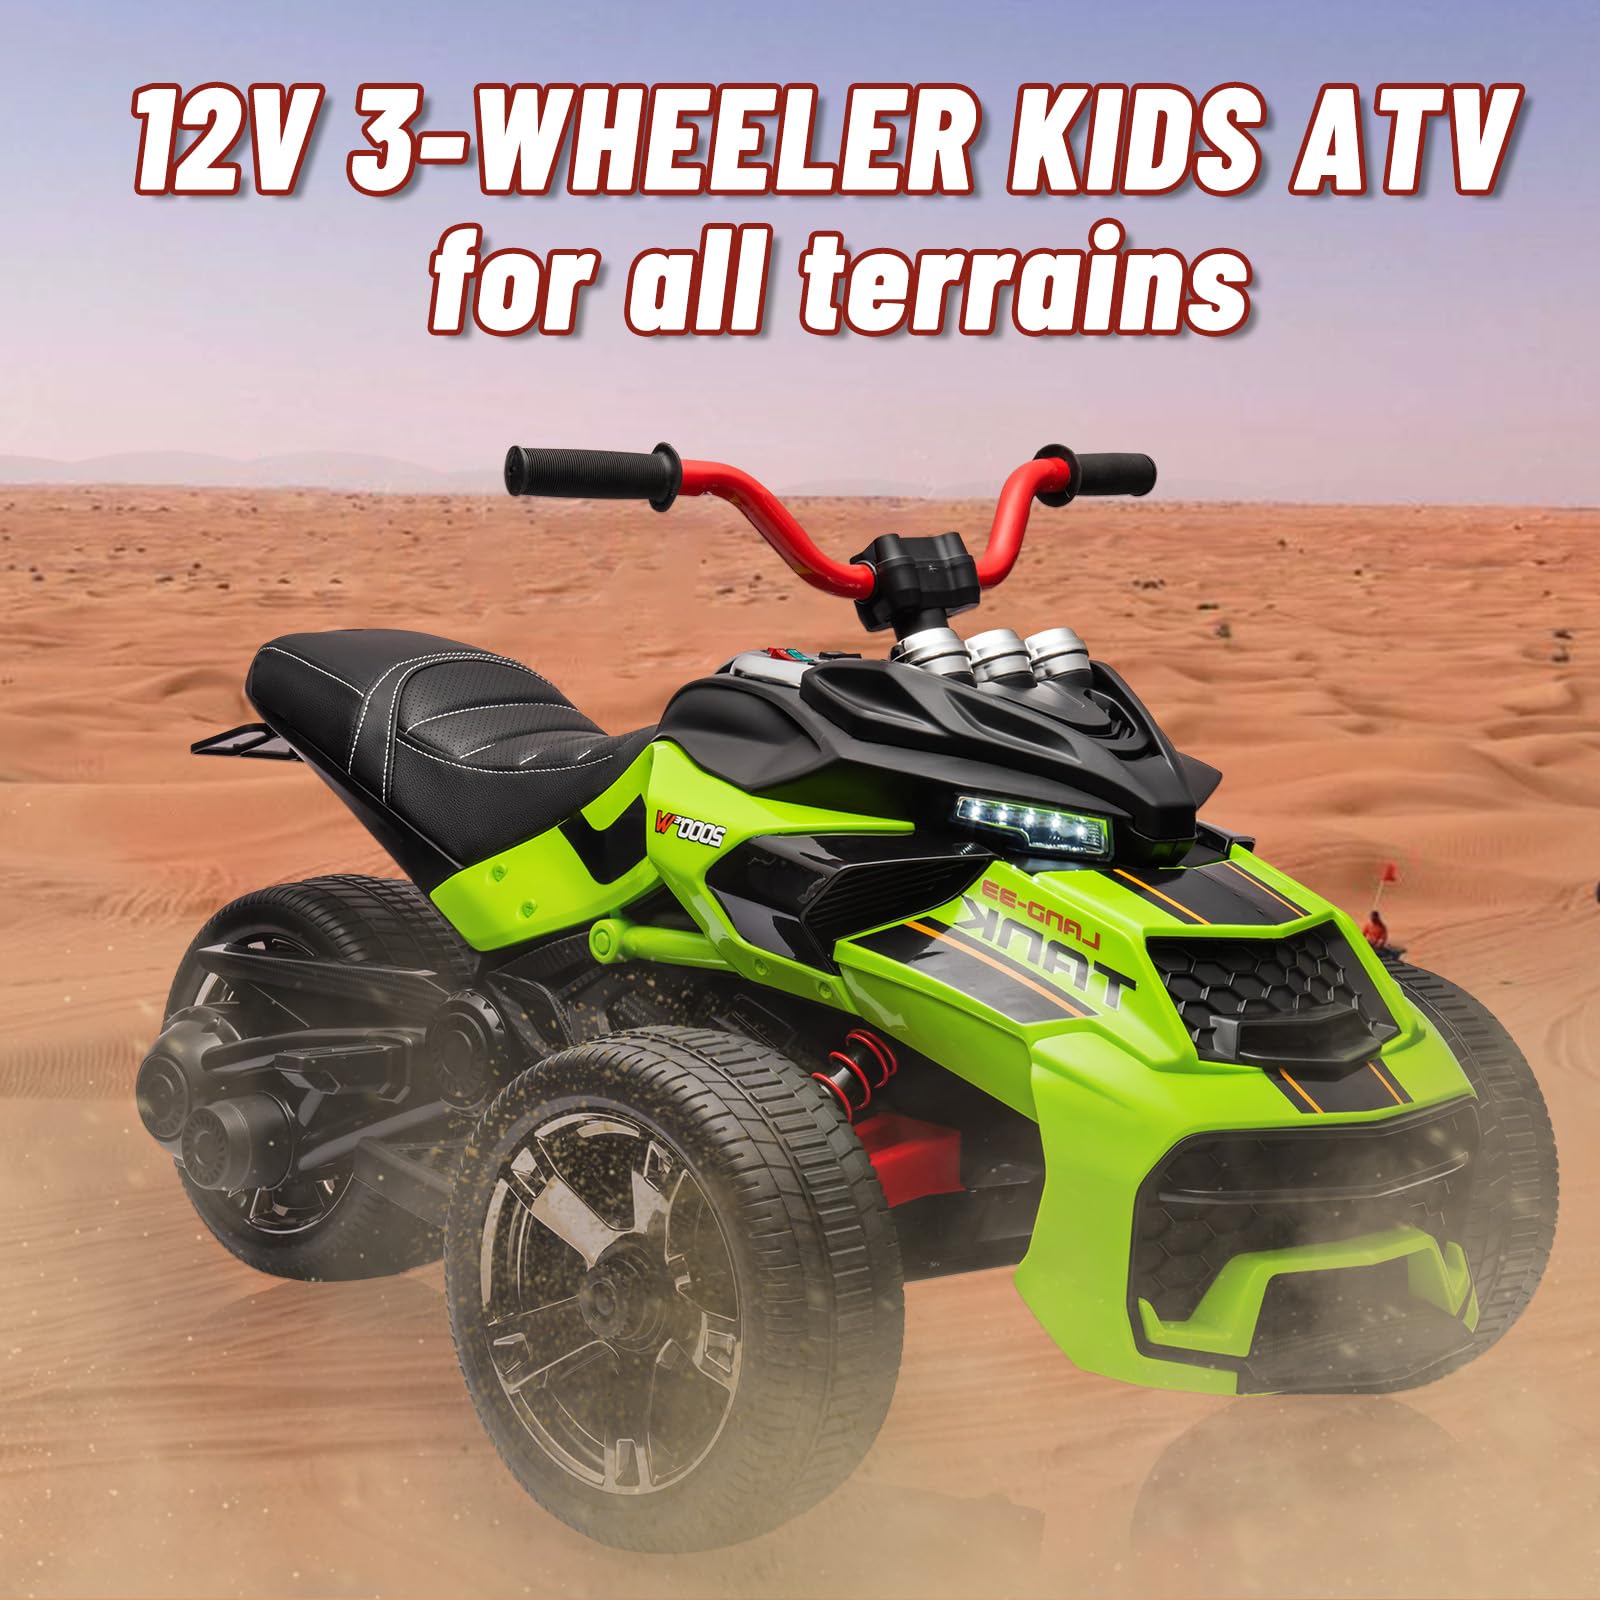 12V Kids Ride on Toy for Kids, Ride On Car w/Parent Remote, 2x55W Powerful Engine 7MPH Battery, 3 Wheelers Electric Vehicle, LED Lights, 2 Speeds, EVA Tire, Music, USB